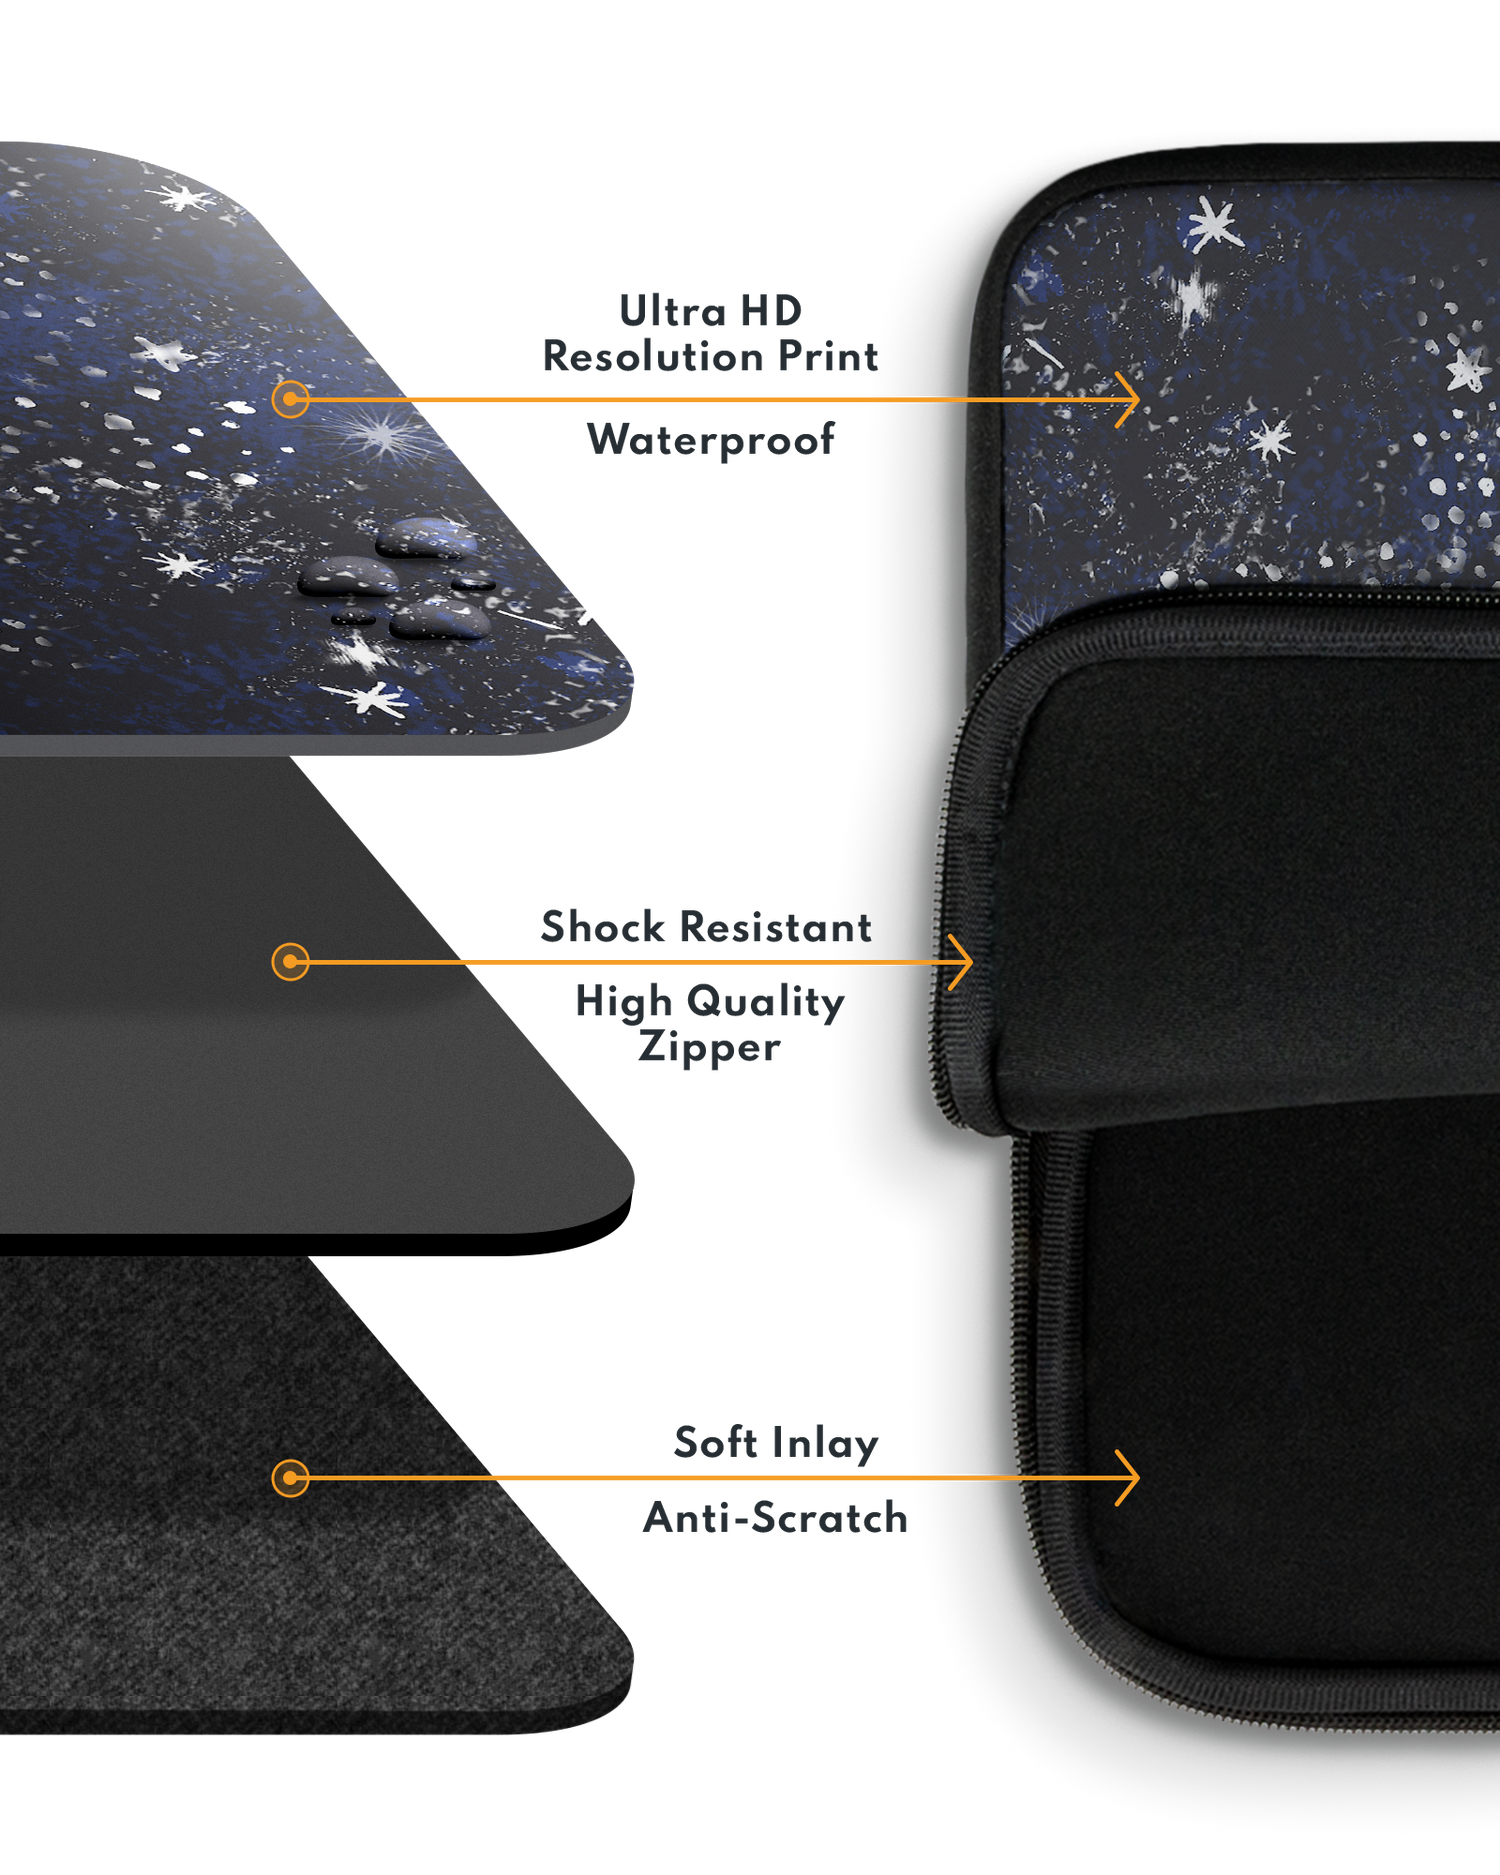 Starry Night Sky Laptop Case 13-14 inch with soft inner lining